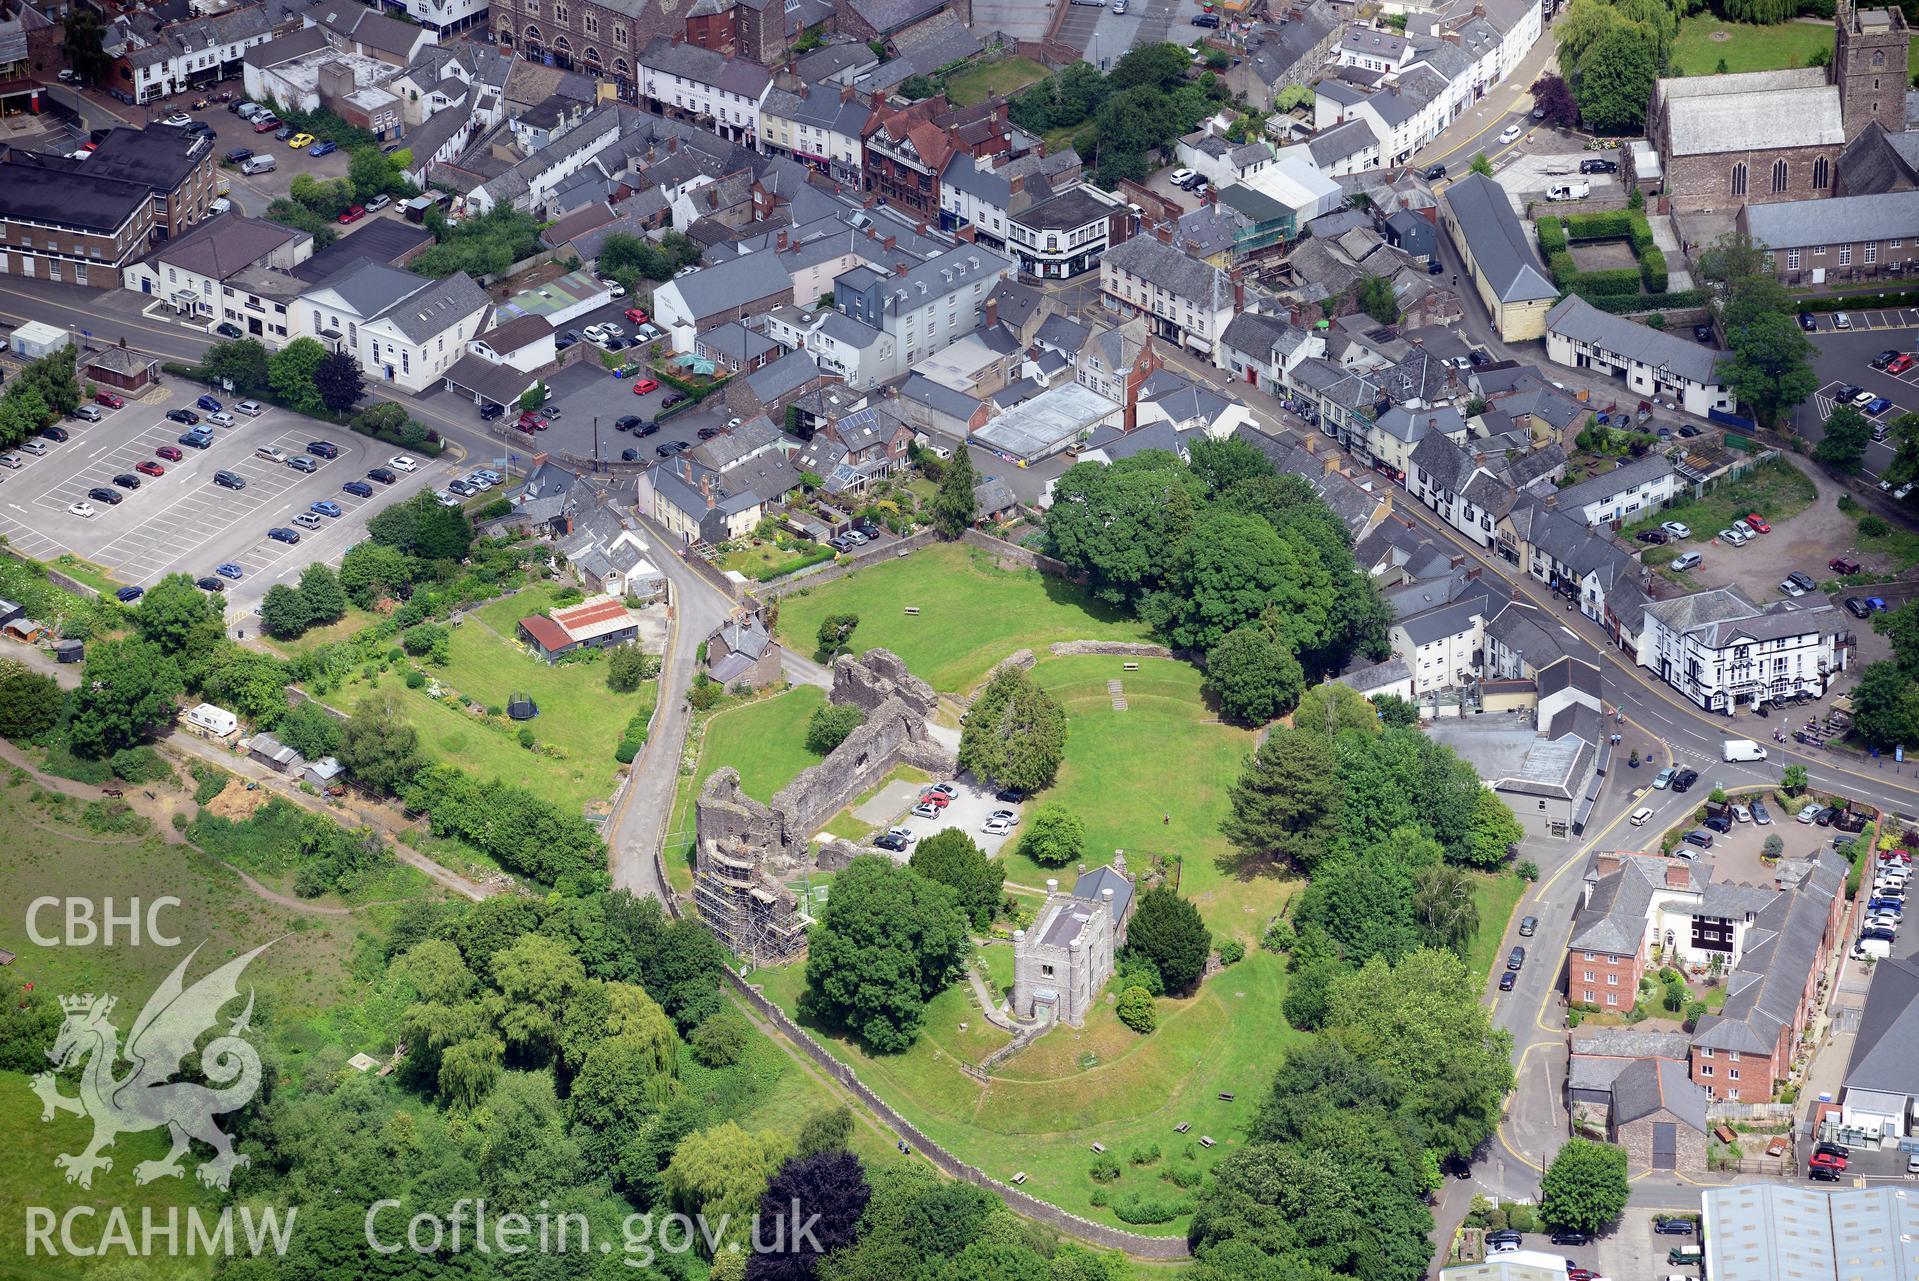 Abergavenny Castle, the castle garden, castle museum, and St. Mary's Church, Abergavenny. Oblique aerial photograph taken during the Royal Commission's programme of archaeological aerial reconnaissance by Toby Driver on 29th June 2015.